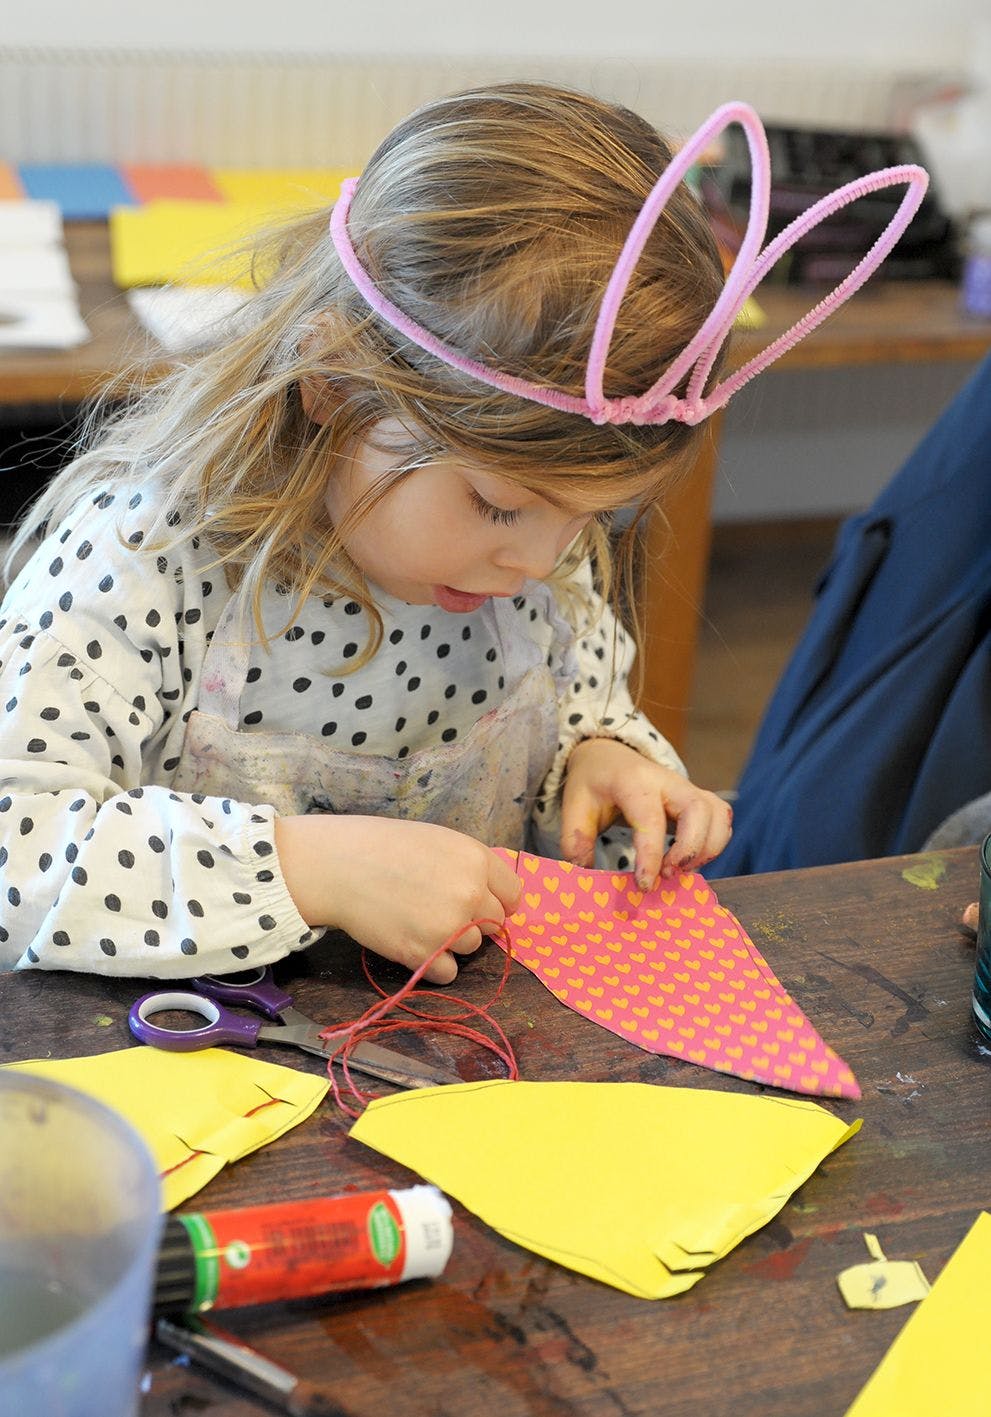 Kid crafting in paper